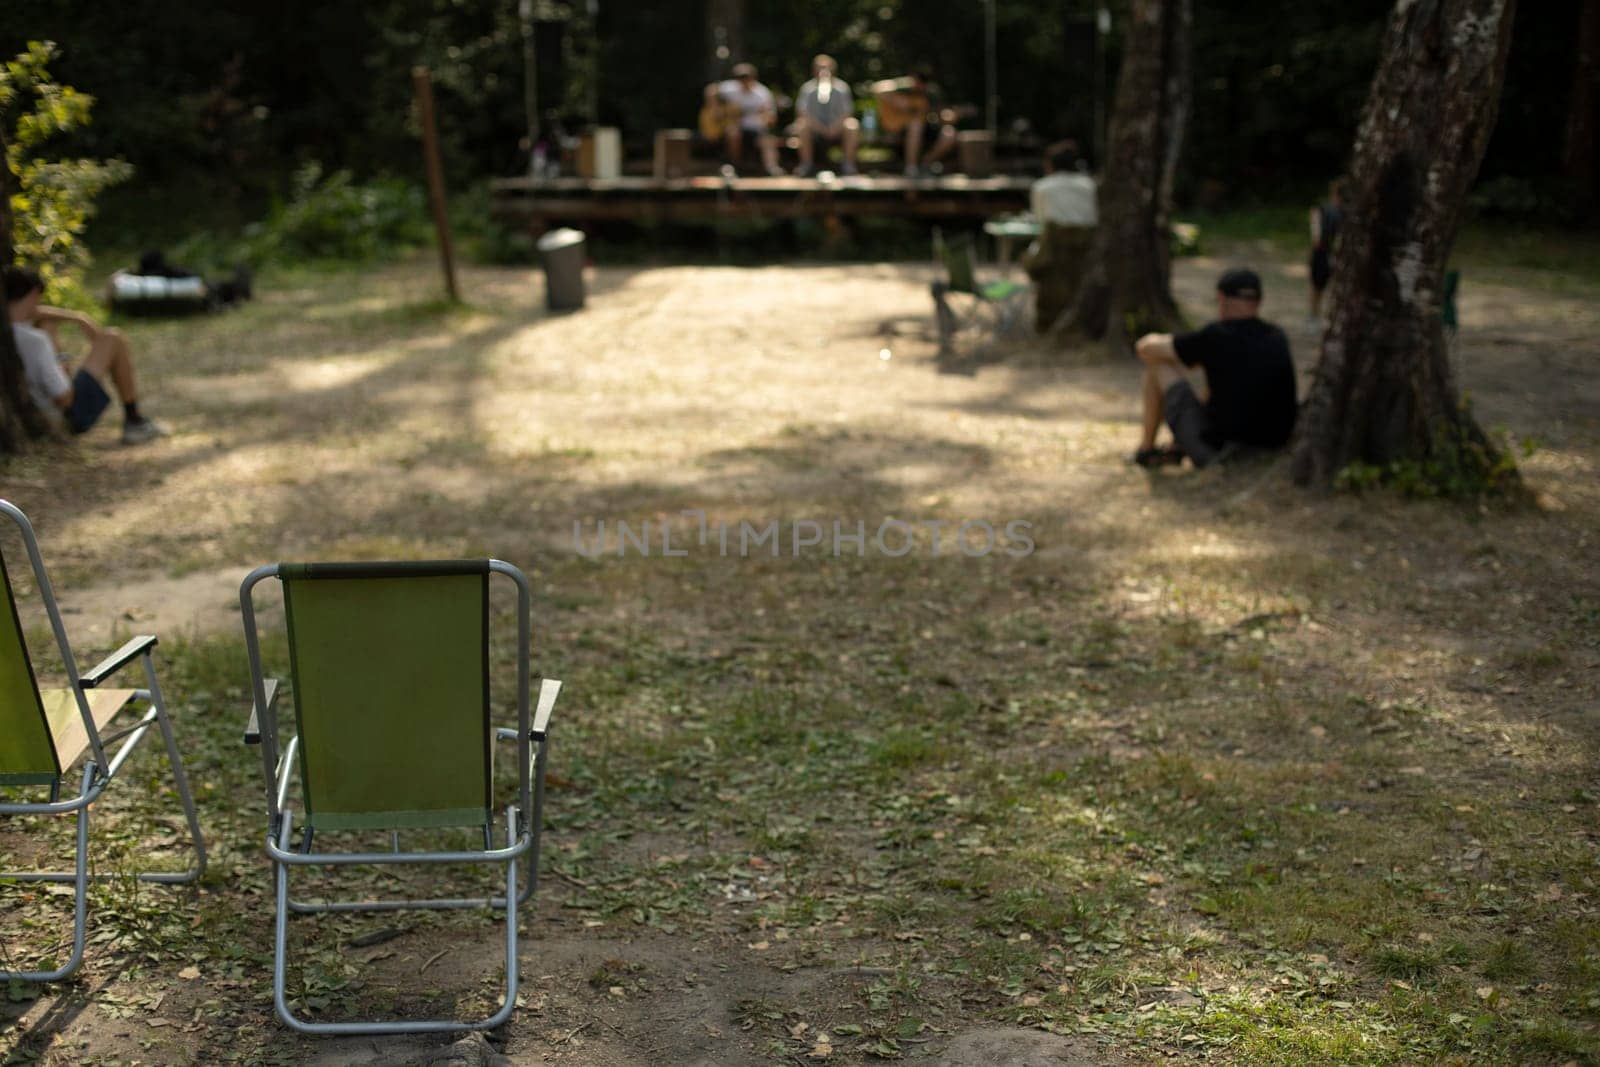 Chair at festival. Rest in woods. People in nature. Concert in park. Tourist chair stands on ground.